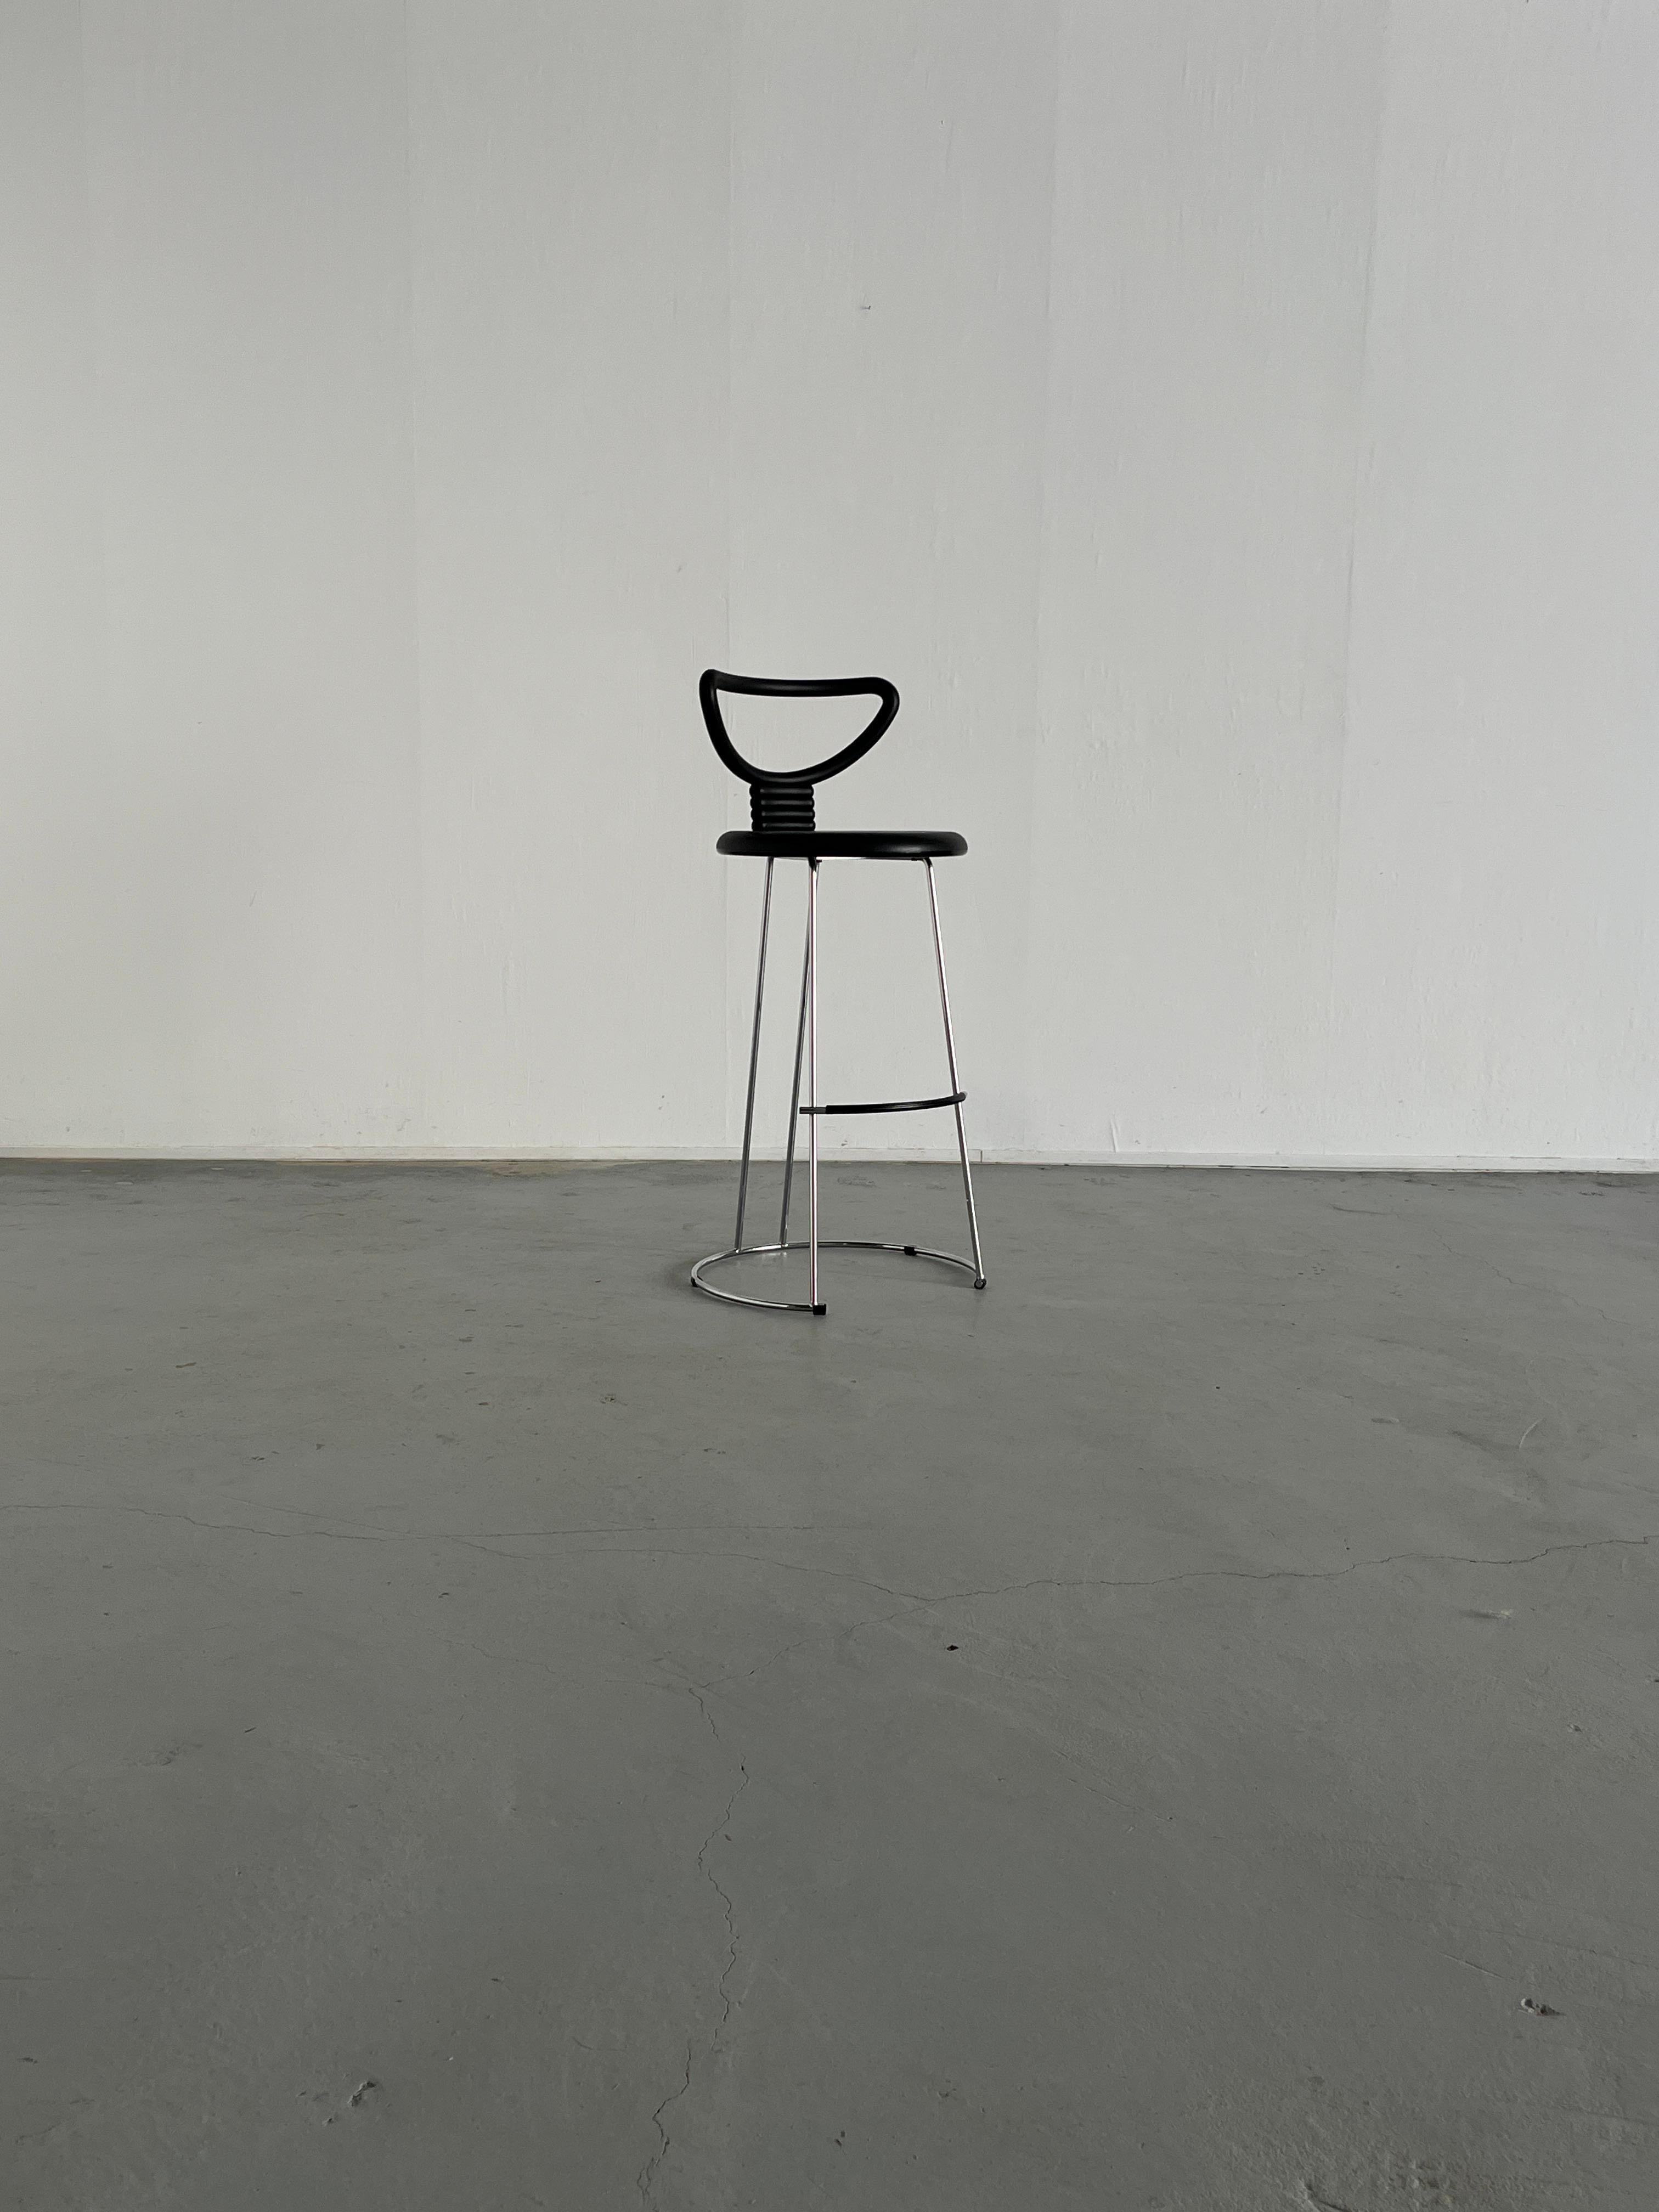 A 'Nardis' bar height stool with rubber like seats on a polished chrome frame designed by Nobu Tanigawa for Fasem Italy.
Unique postmodern design combined with great comfort.

The chair features a sturdy steel frame with a durable rubber coating and